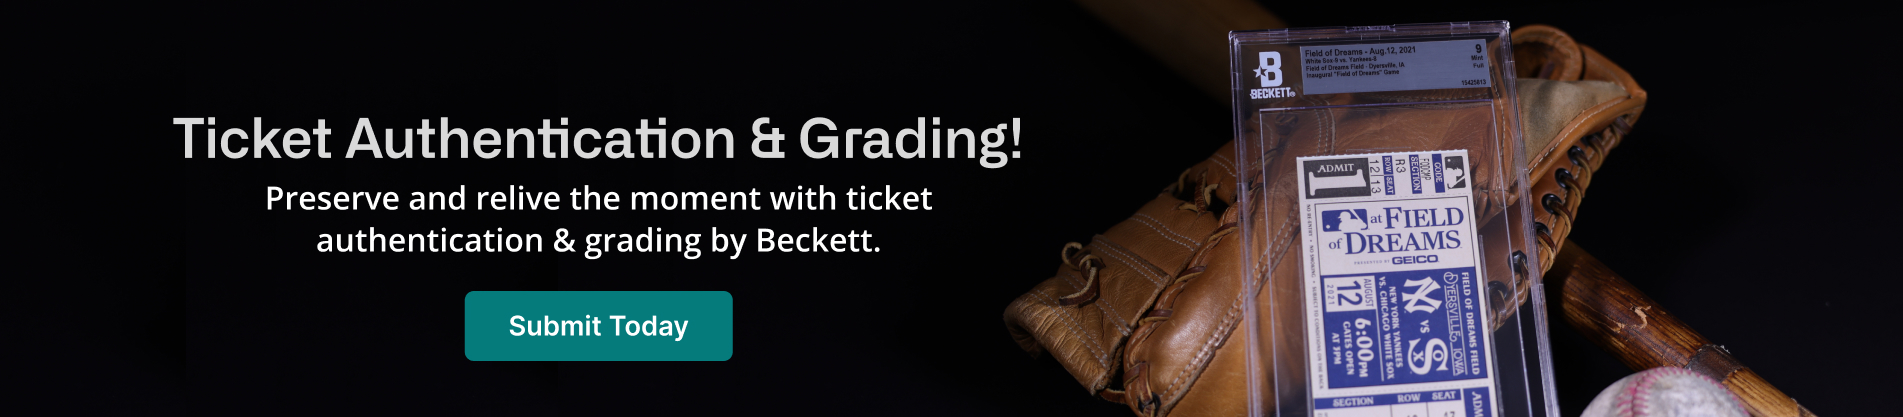 Beckett Ticket Grading and Authentication